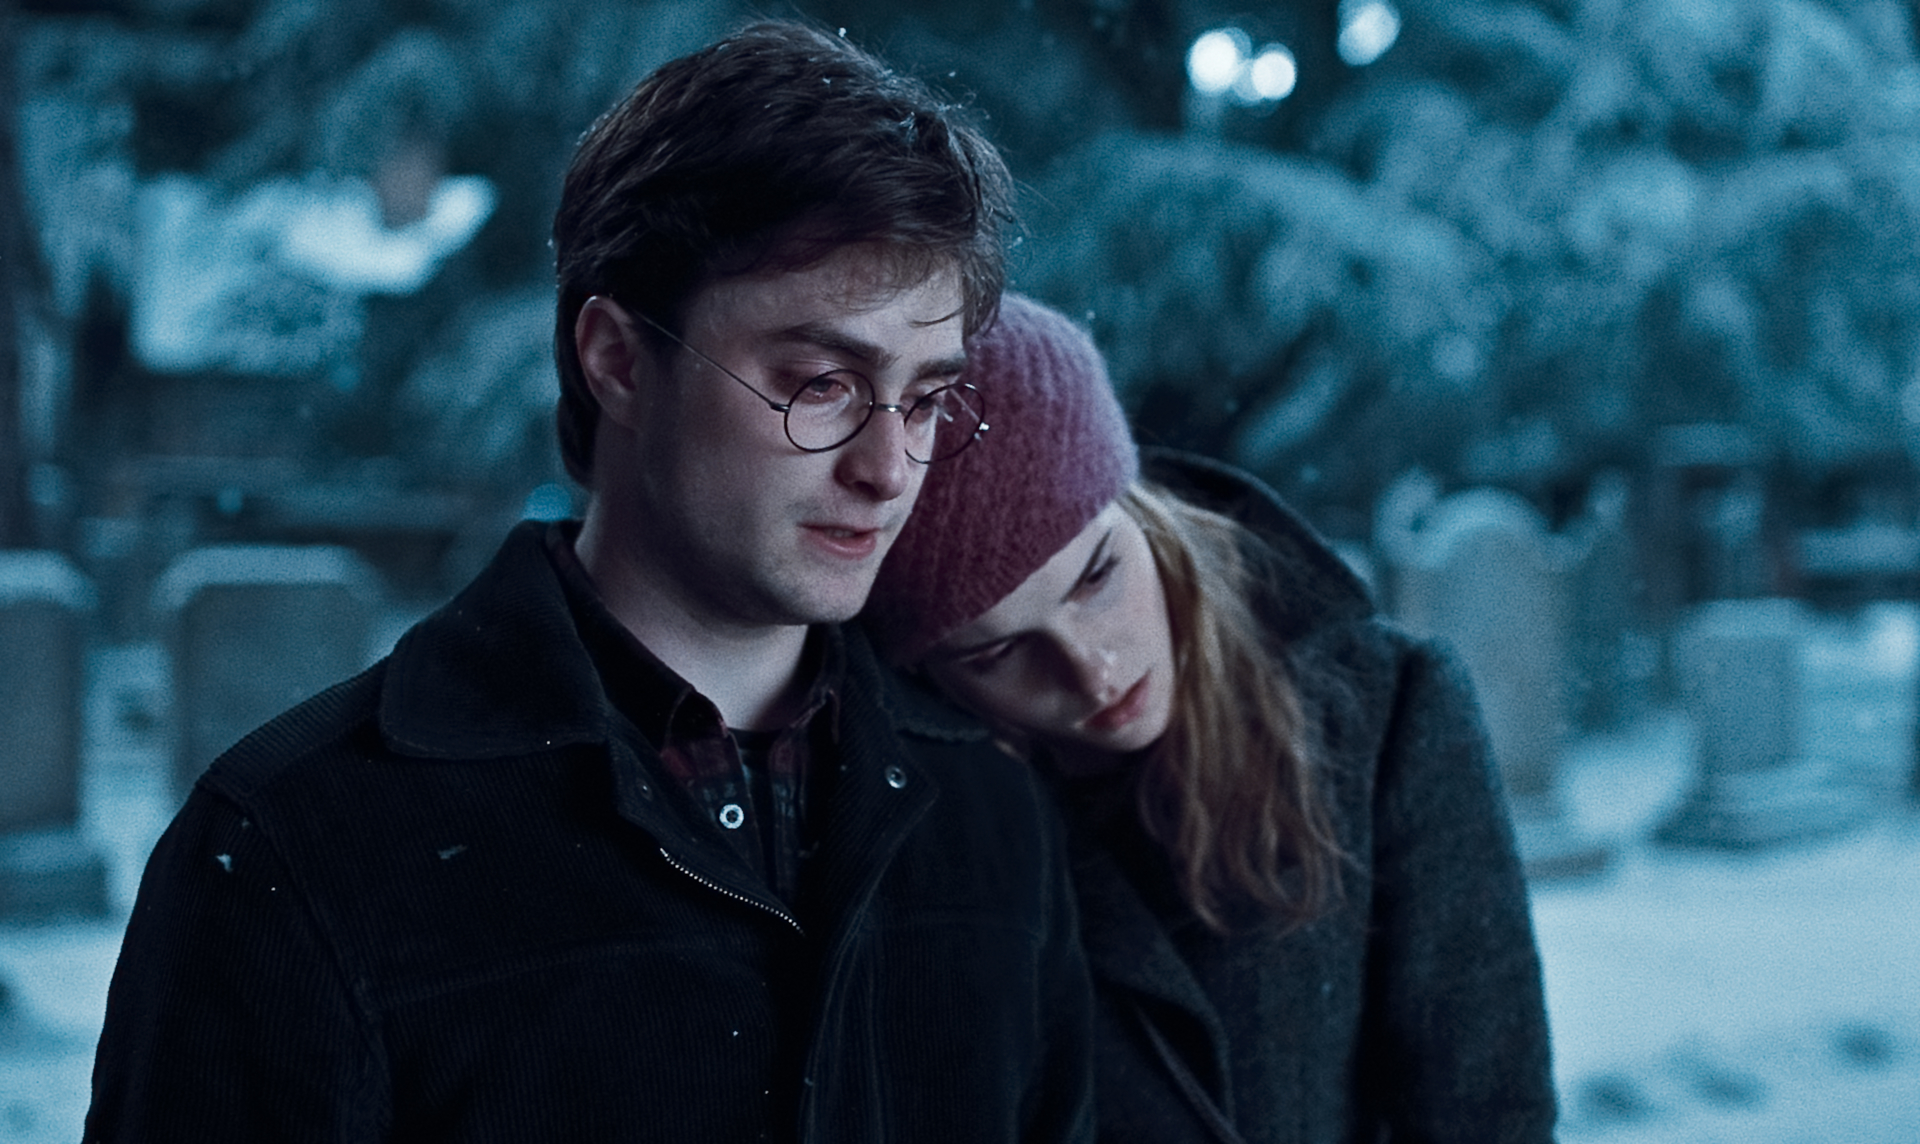 Free download wallpaper Harry Potter, Emma Watson, Daniel Radcliffe, Movie, Hermione Granger, Harry Potter And The Deathly Hallows: Part 1 on your PC desktop